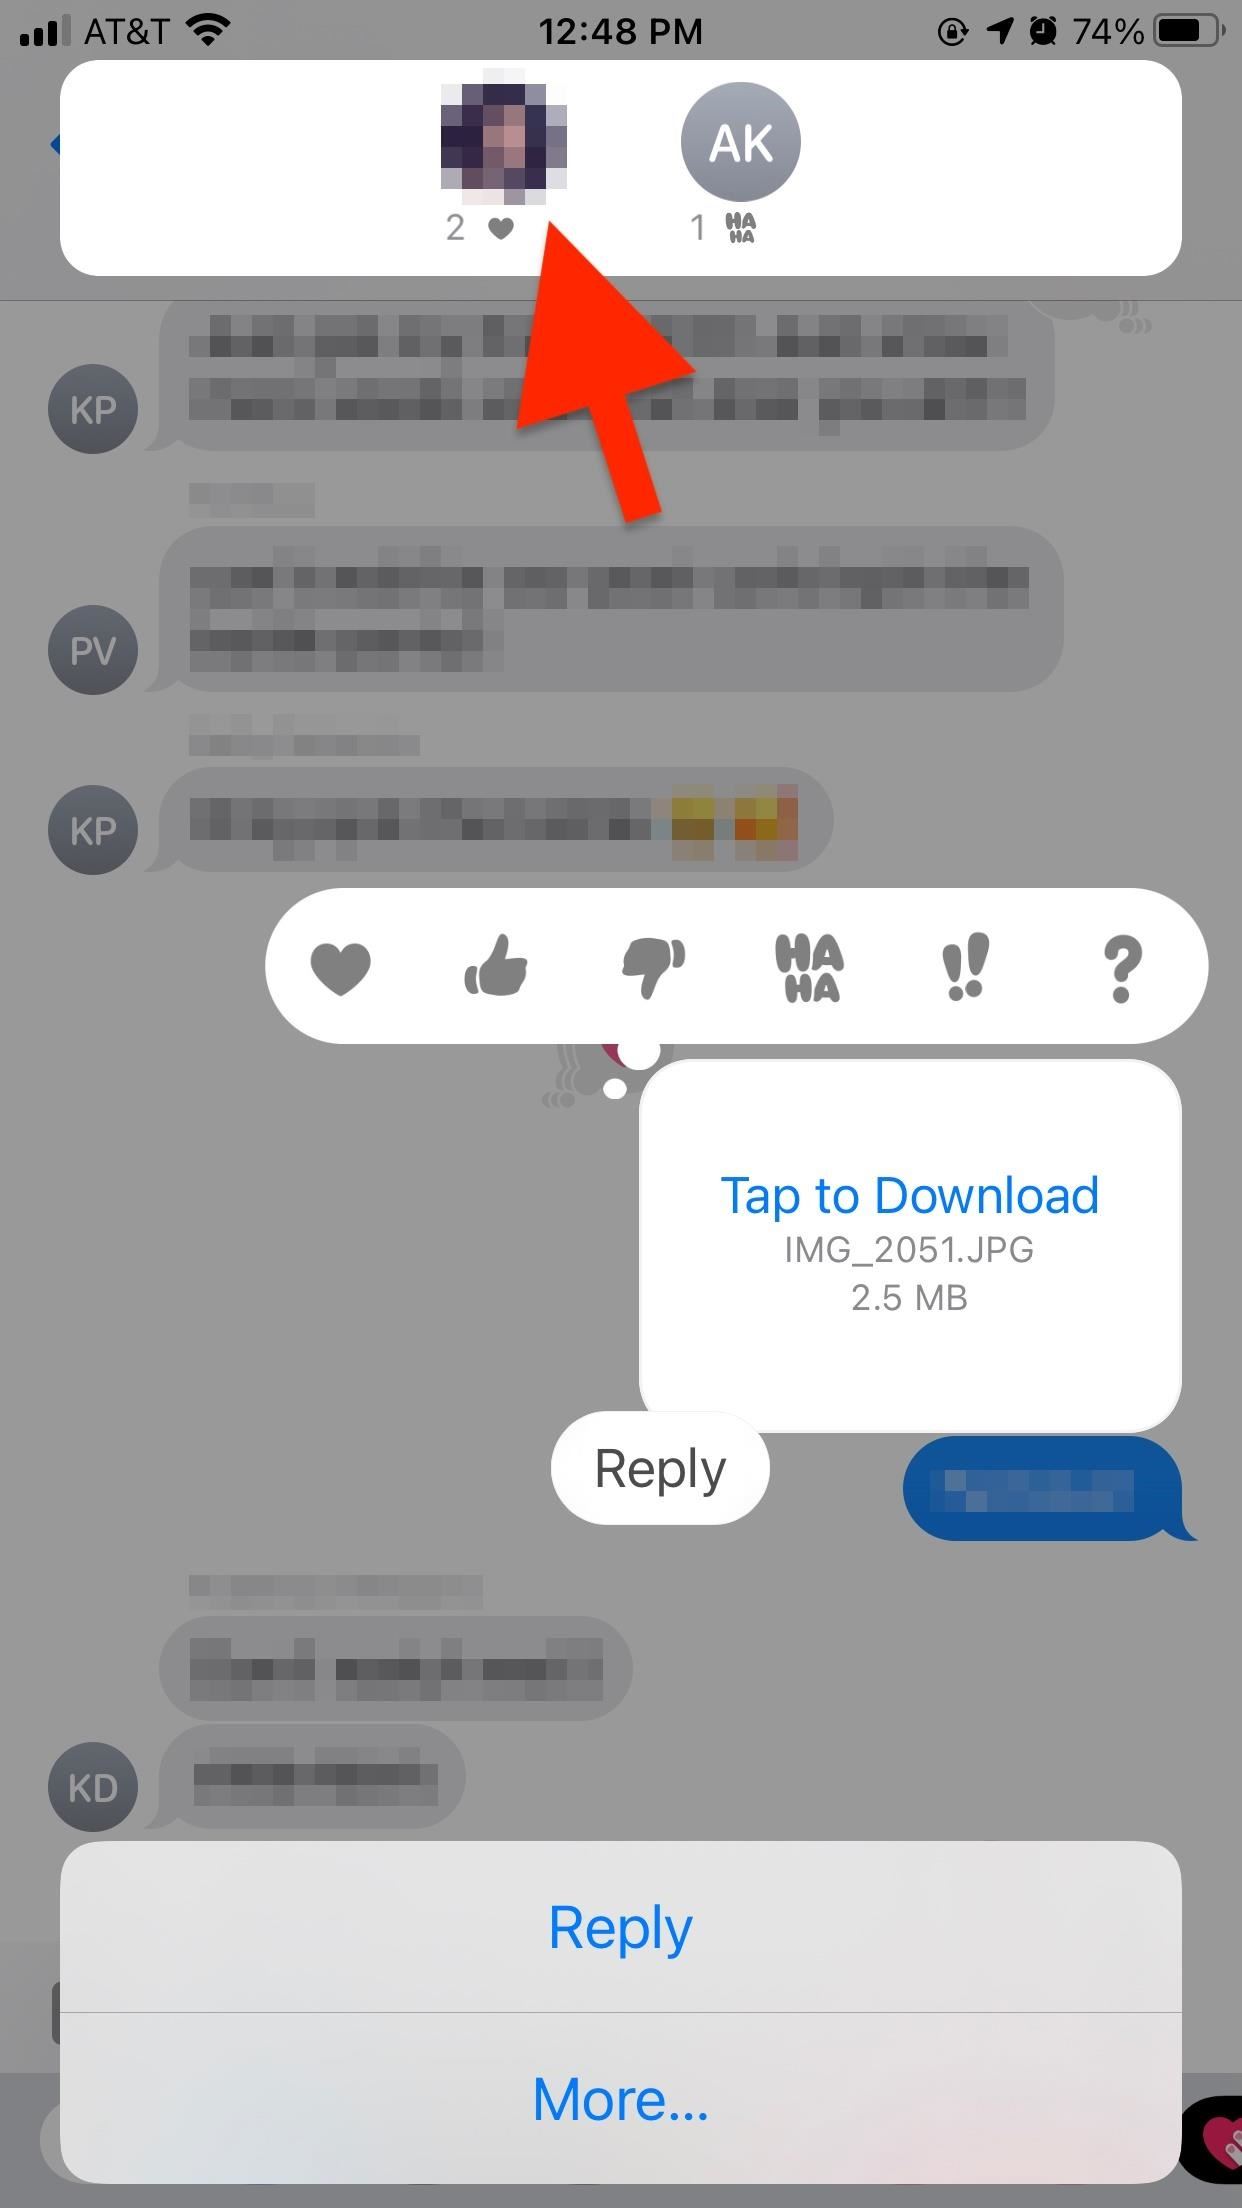 How to See All the People Who Tapbacked on an iMessage